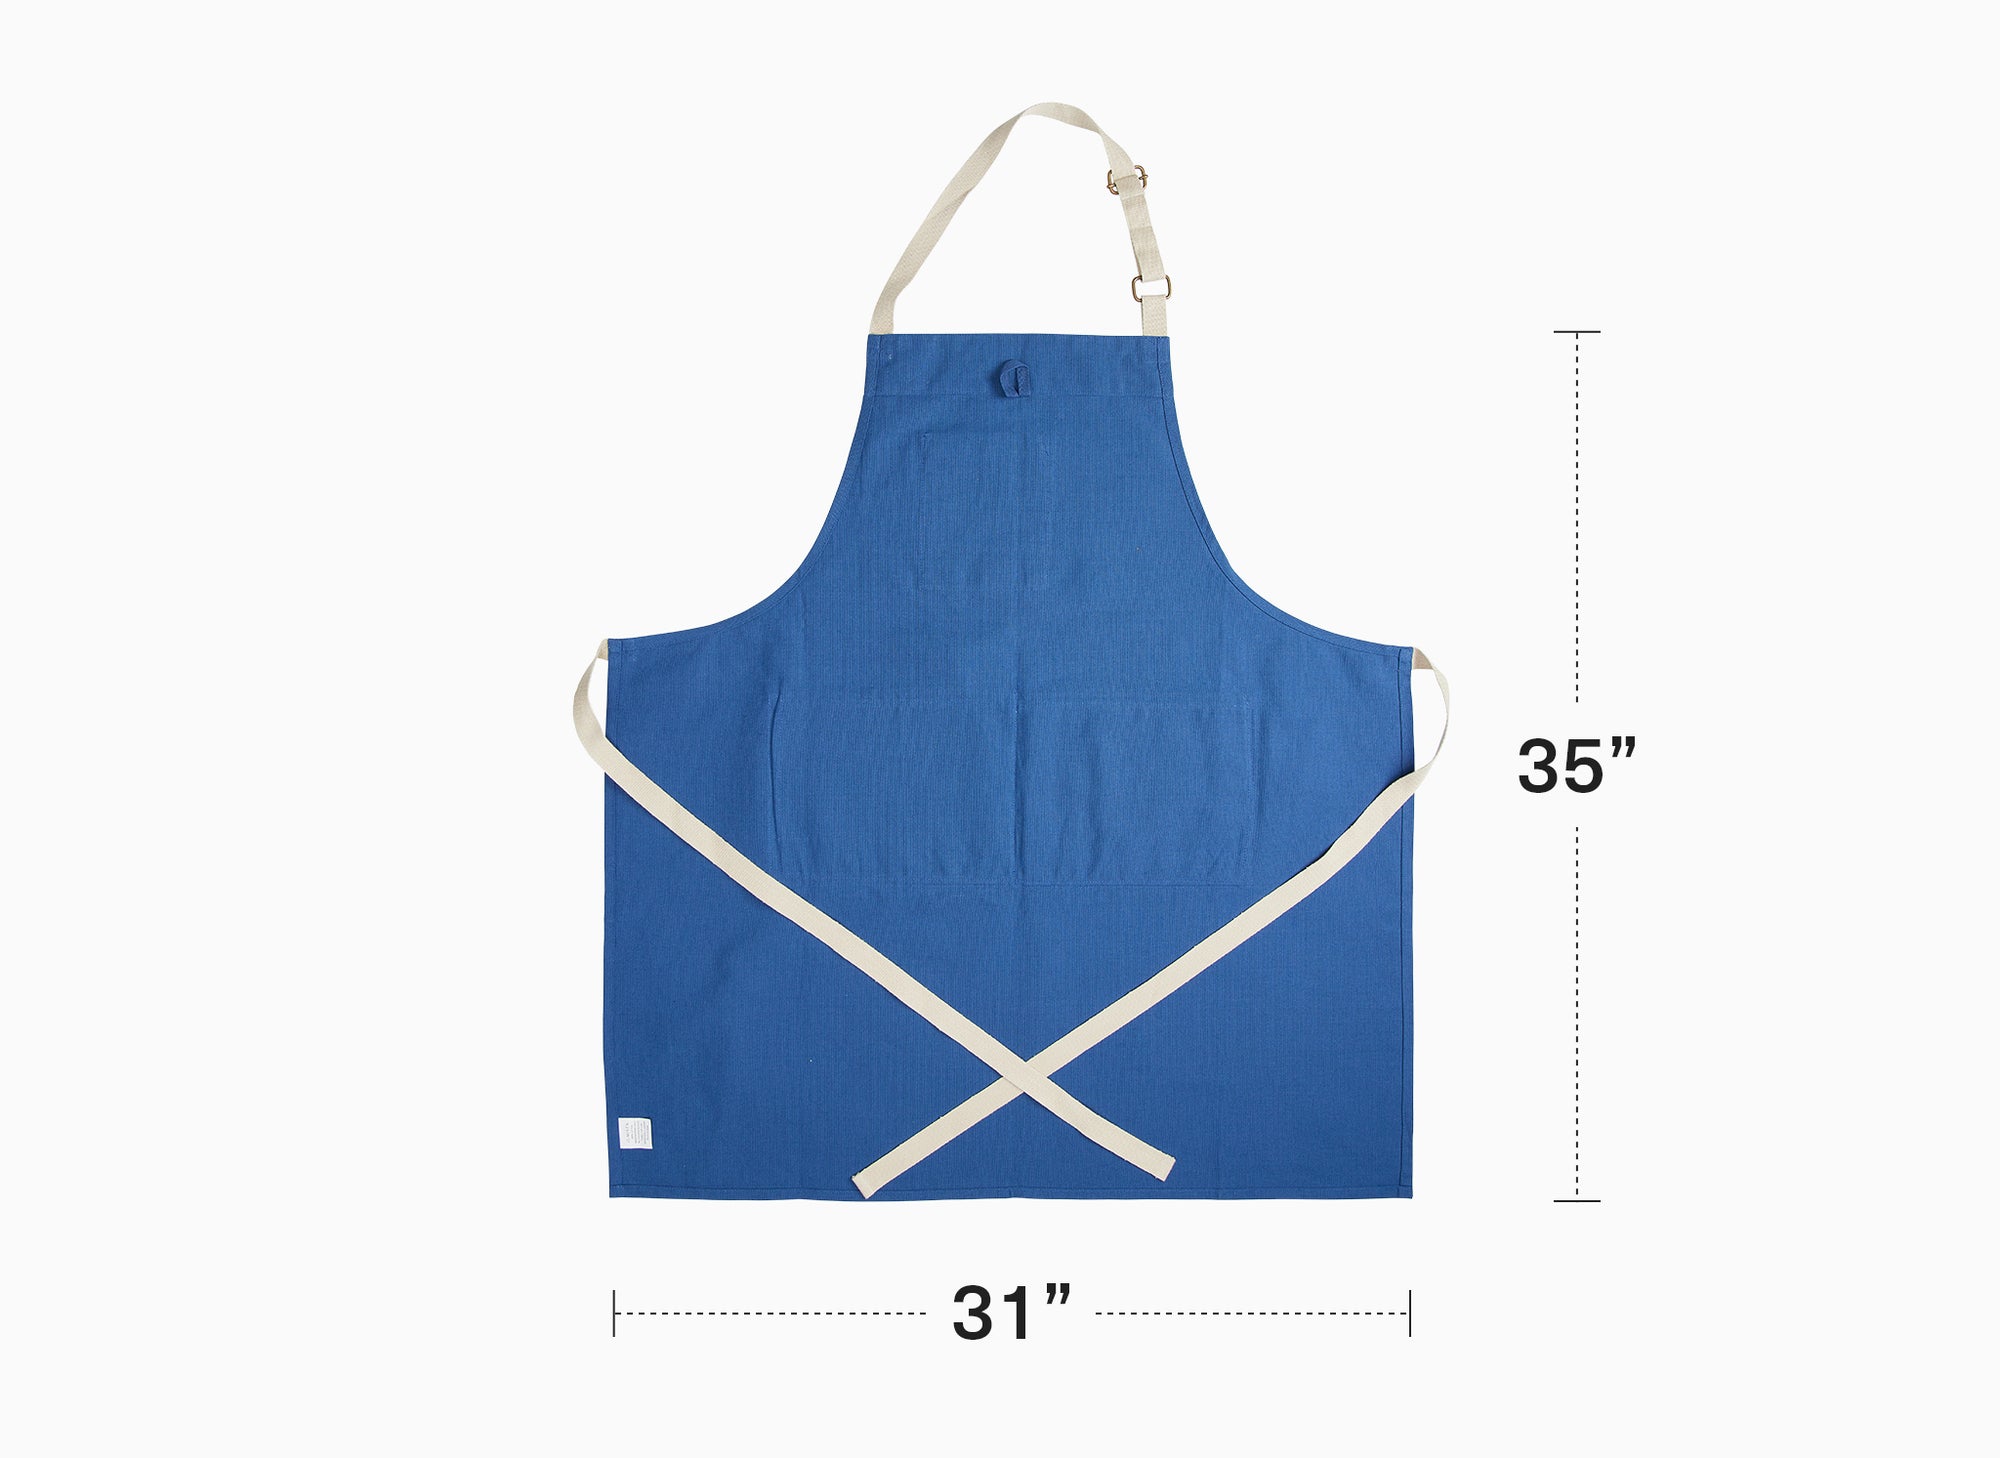 A blue Misen Apron lies flat on a white background. Graphics on the image show the apron’s measurement: 35 inches tall and 31 inches wide.